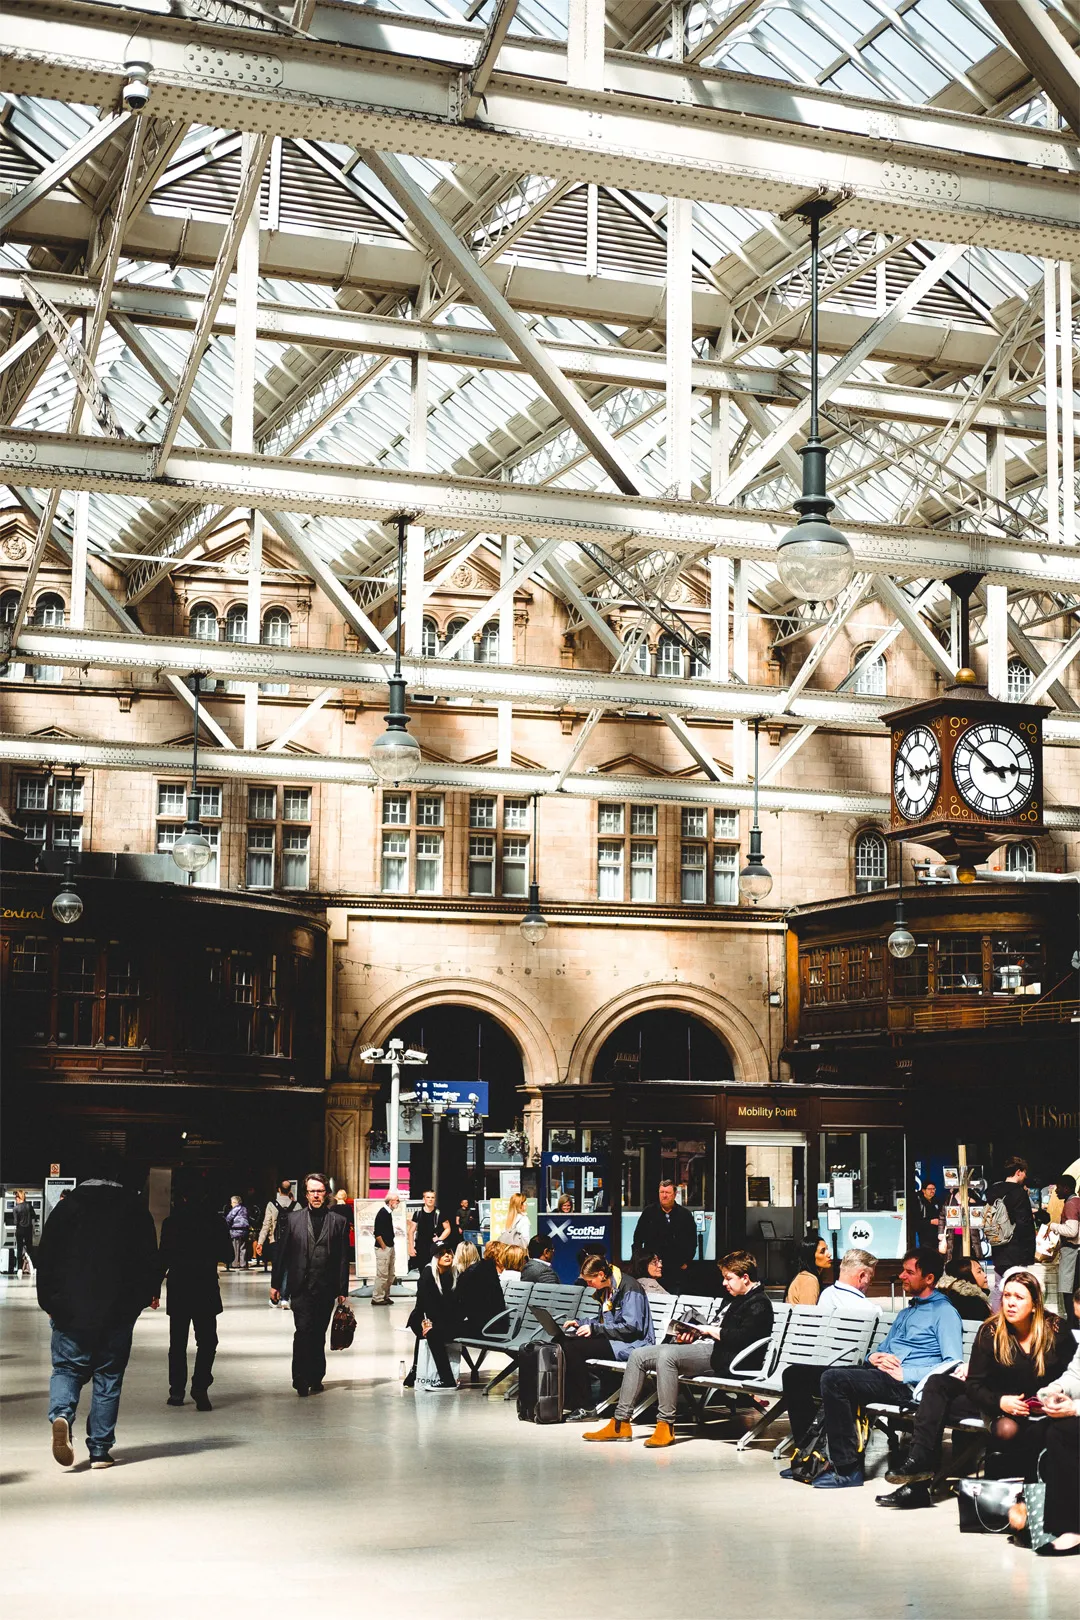 Interior of Glasgow Central Station, featuring individuals sat in waiting area awaiting trains, a ScotRail stand and station clock showing time of 2:50